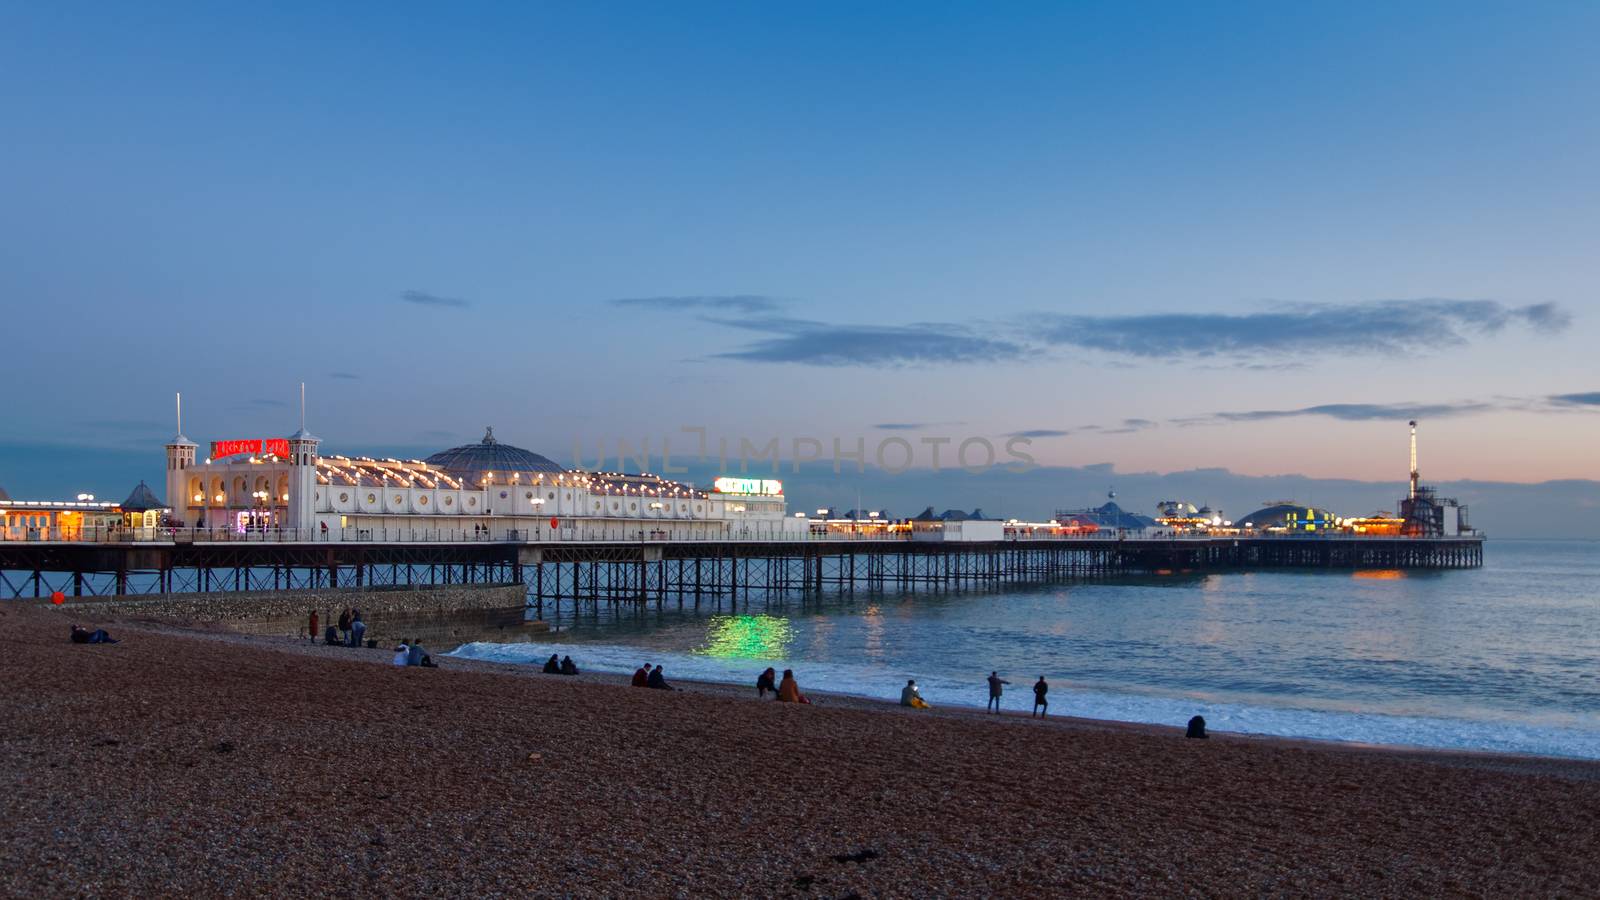 BRIGHTON, EAST SUSSEX/UK - JANUARY 26 : View of Brighton Pier in Brighton East Sussex on January 26, 2018. Unidentified people.